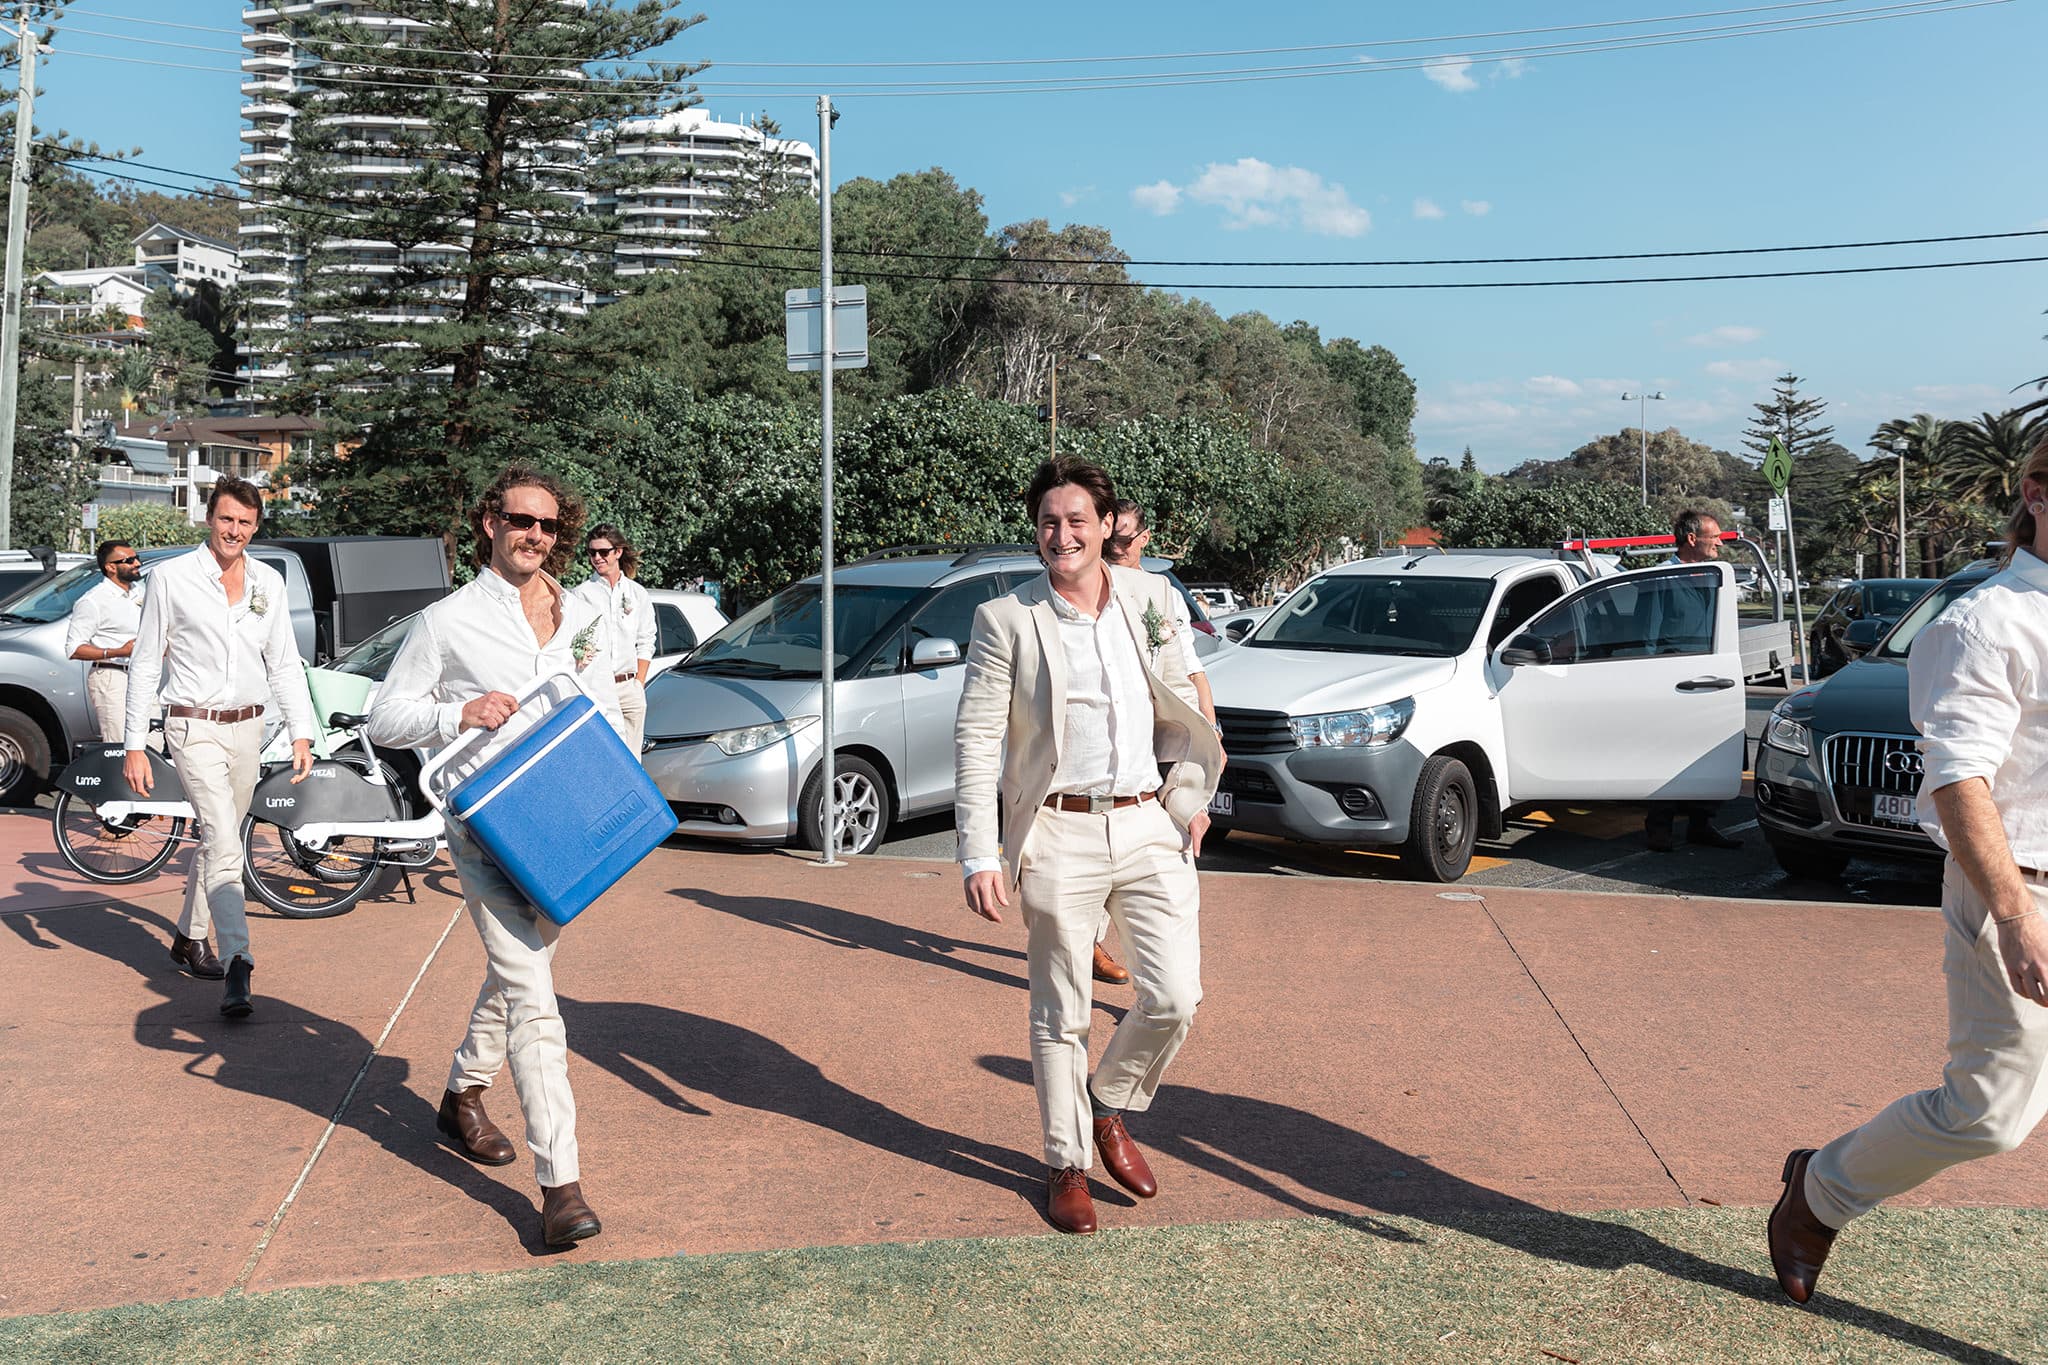 Groom and groomsmen arriving to the wedding in Burleigh Heads, Gold Coast.